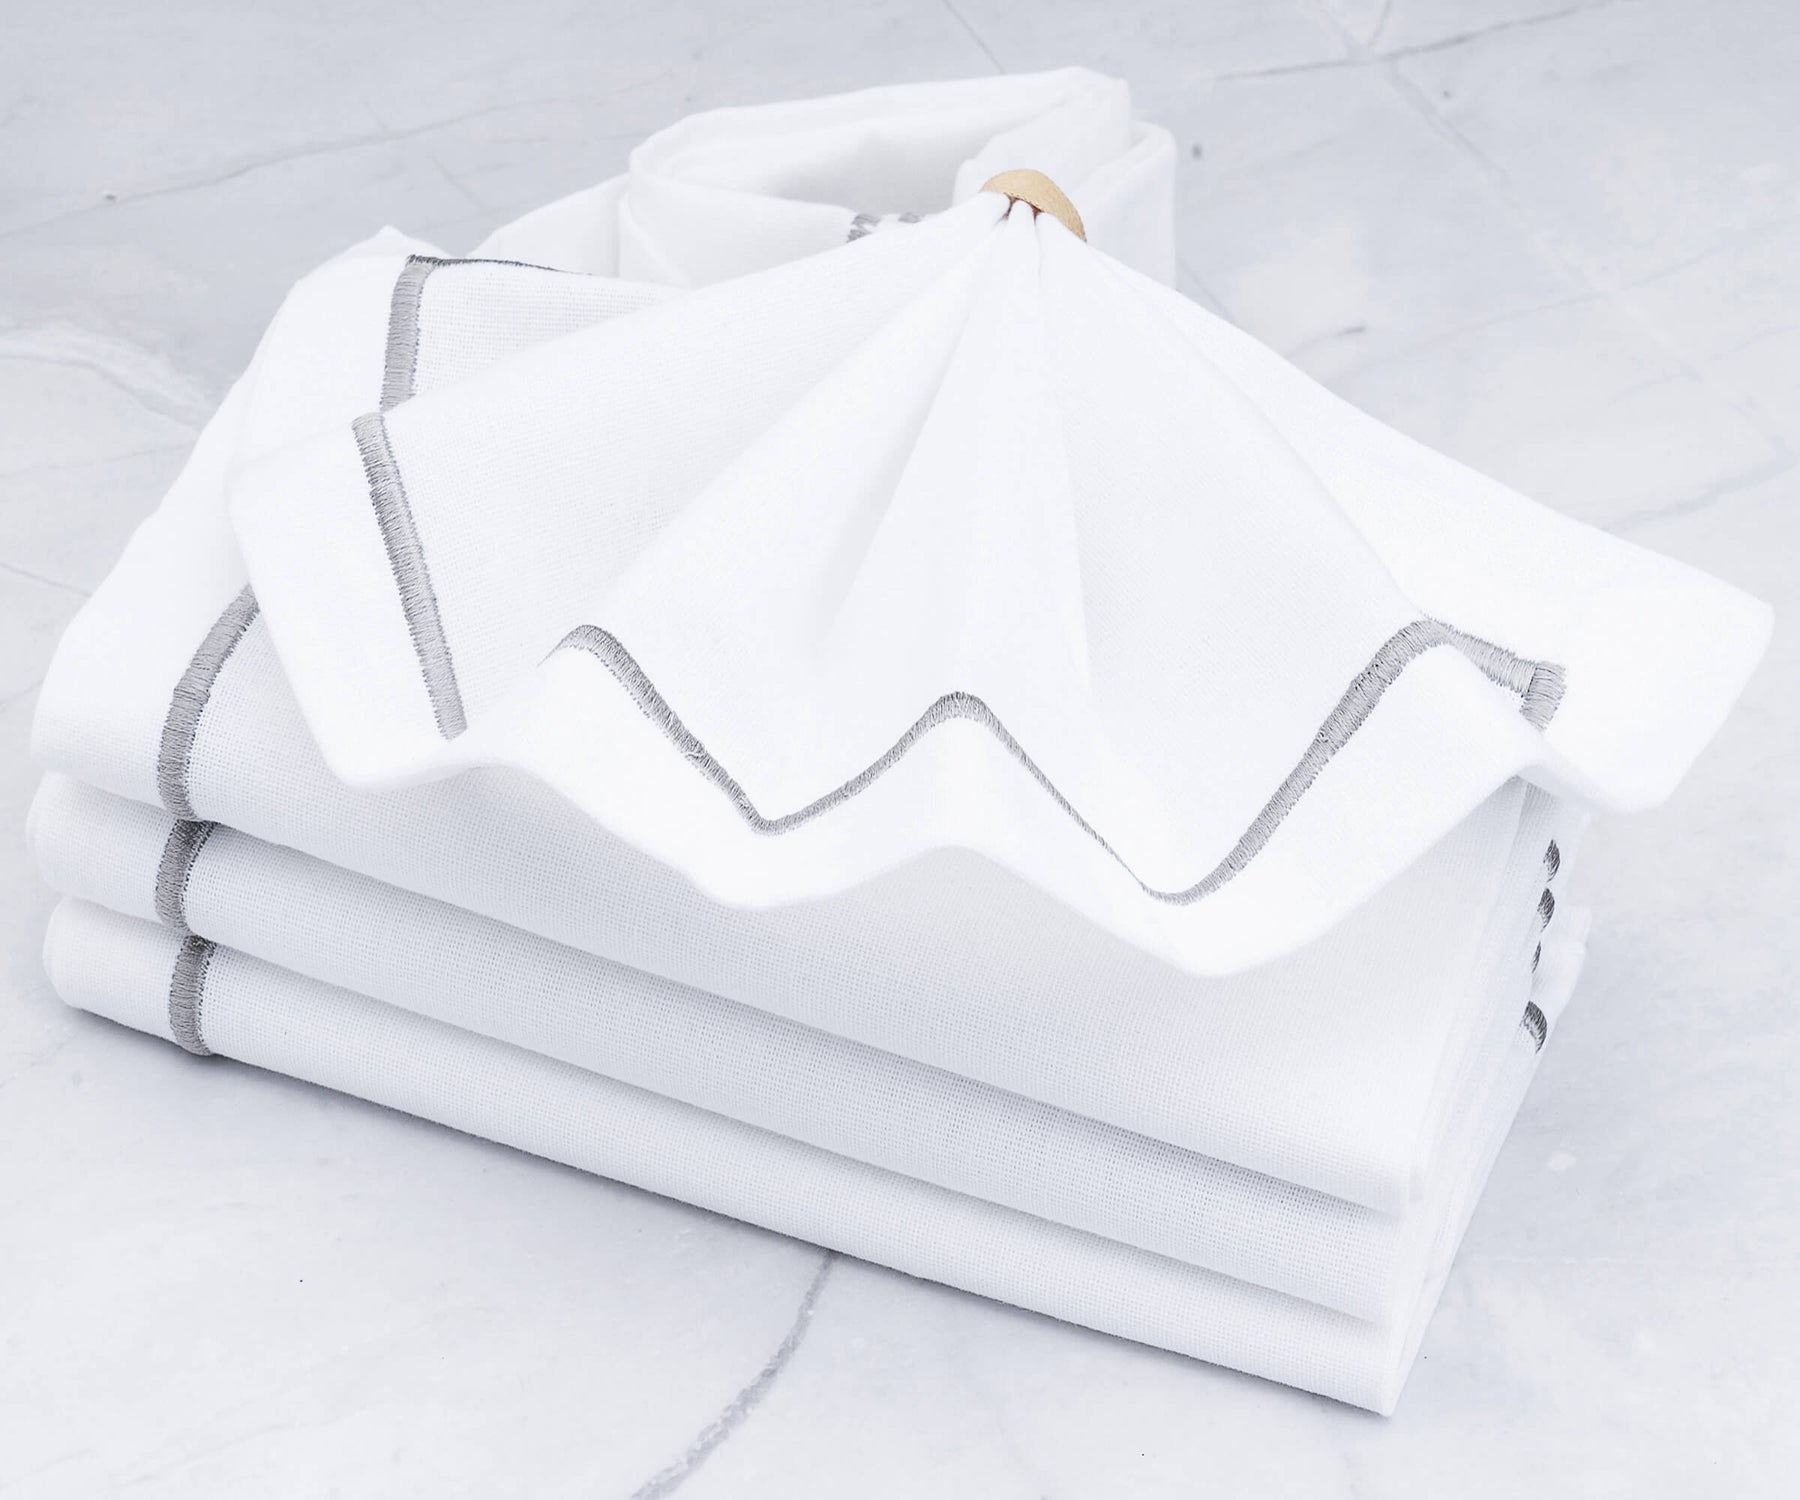 Pile of white dinner napkins with one folded on top